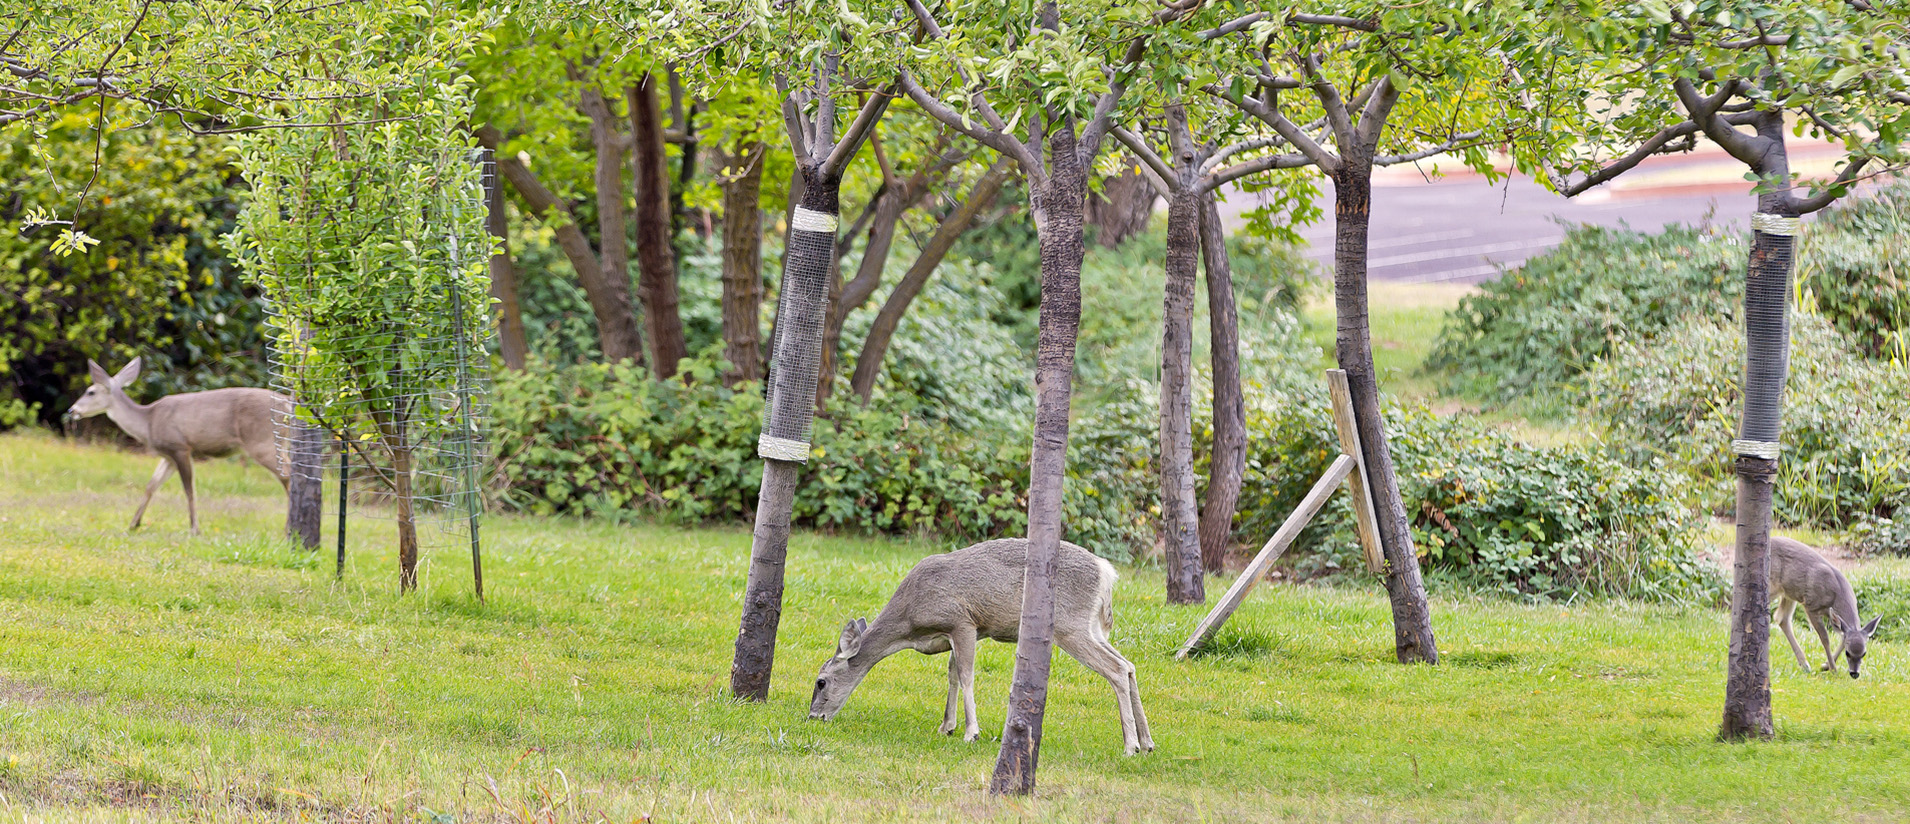 Deer graze on the lawn at Tonto Natural Bridge State Park